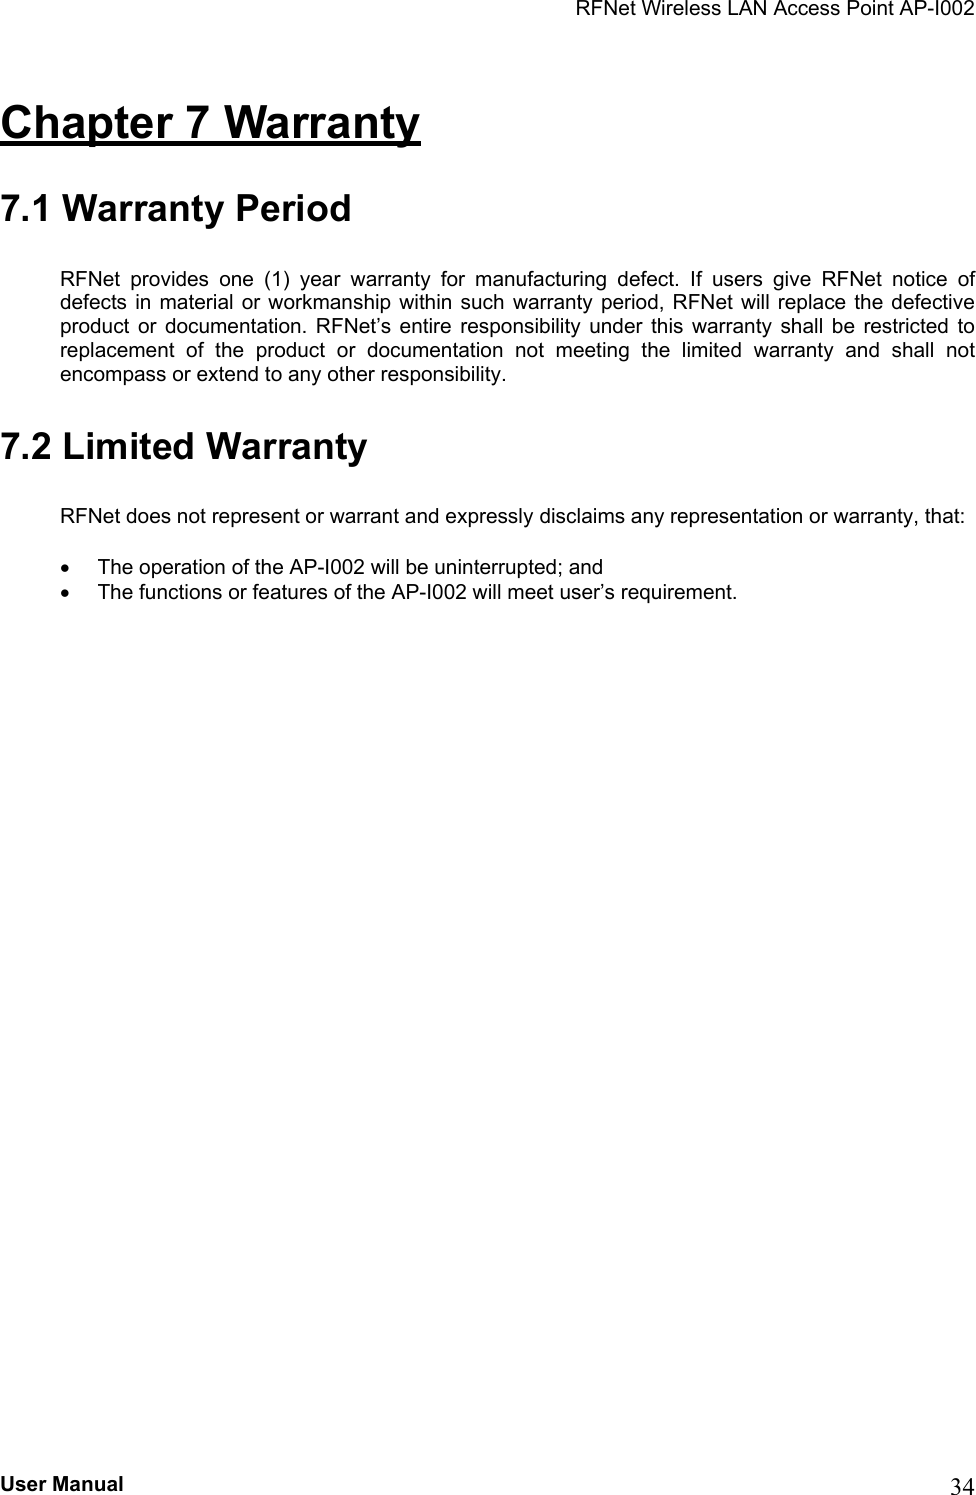 RFNet Wireless LAN Access Point AP-I002 Chapter 7 Warranty  7.1 Warranty Period RFNet provides one (1) year warranty for manufacturing defect. If users give RFNet notice of defects in material or workmanship within such warranty period, RFNet will replace the defective product or documentation. RFNet’s entire responsibility under this warranty shall be restricted to replacement of the product or documentation not meeting the limited warranty and shall not encompass or extend to any other responsibility. 7.2 Limited Warranty RFNet does not represent or warrant and expressly disclaims any representation or warranty, that: •  The operation of the AP-I002 will be uninterrupted; and •  The functions or features of the AP-I002 will meet user’s requirement. User Manual  34 